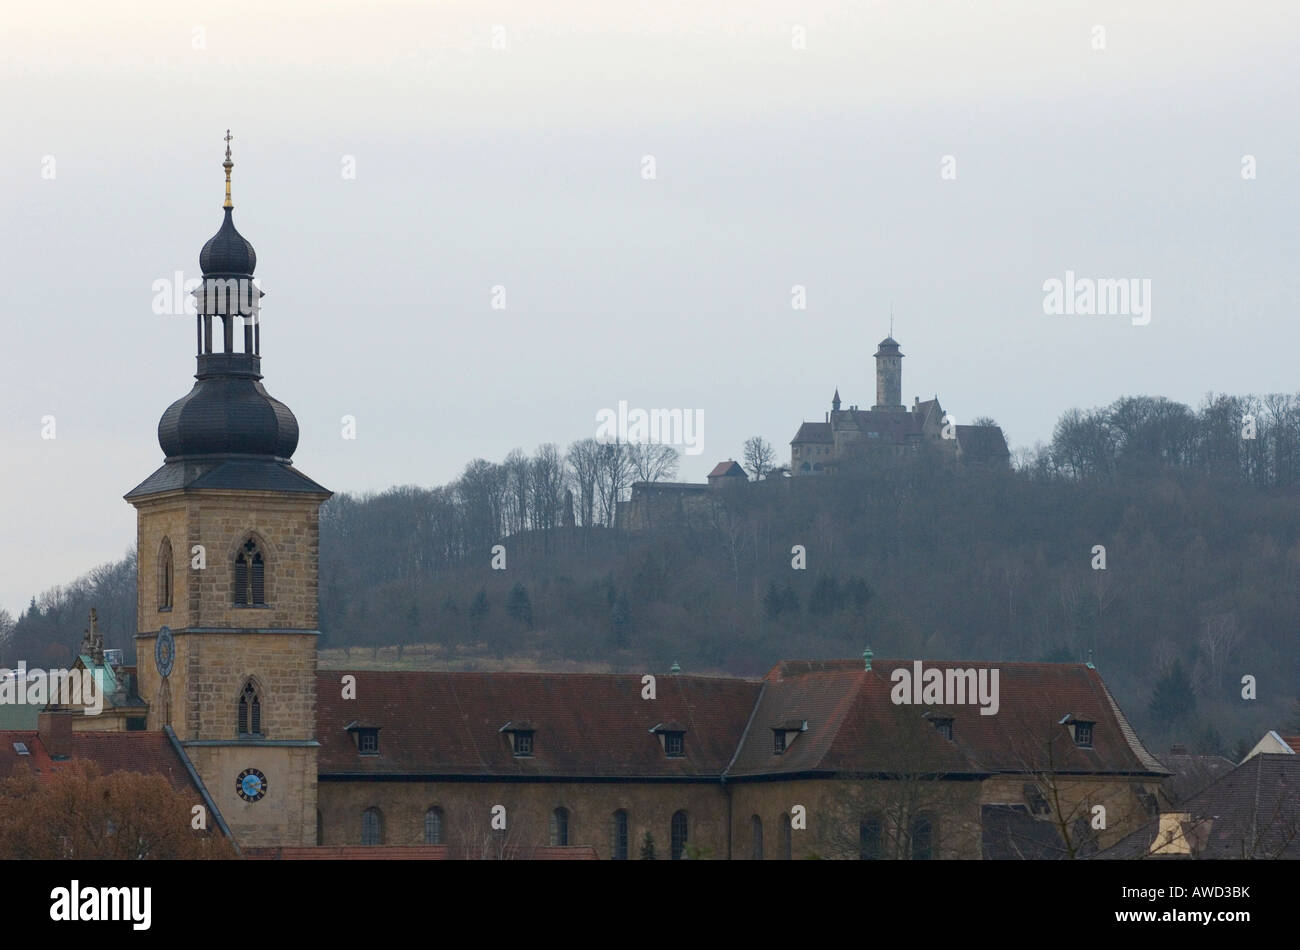 Jakobskirche (St. Jacob's Church) with Altenburg Castle in the background, Bamberg, Upper Franconia, Bavaria, Germany, Europe Stock Photo